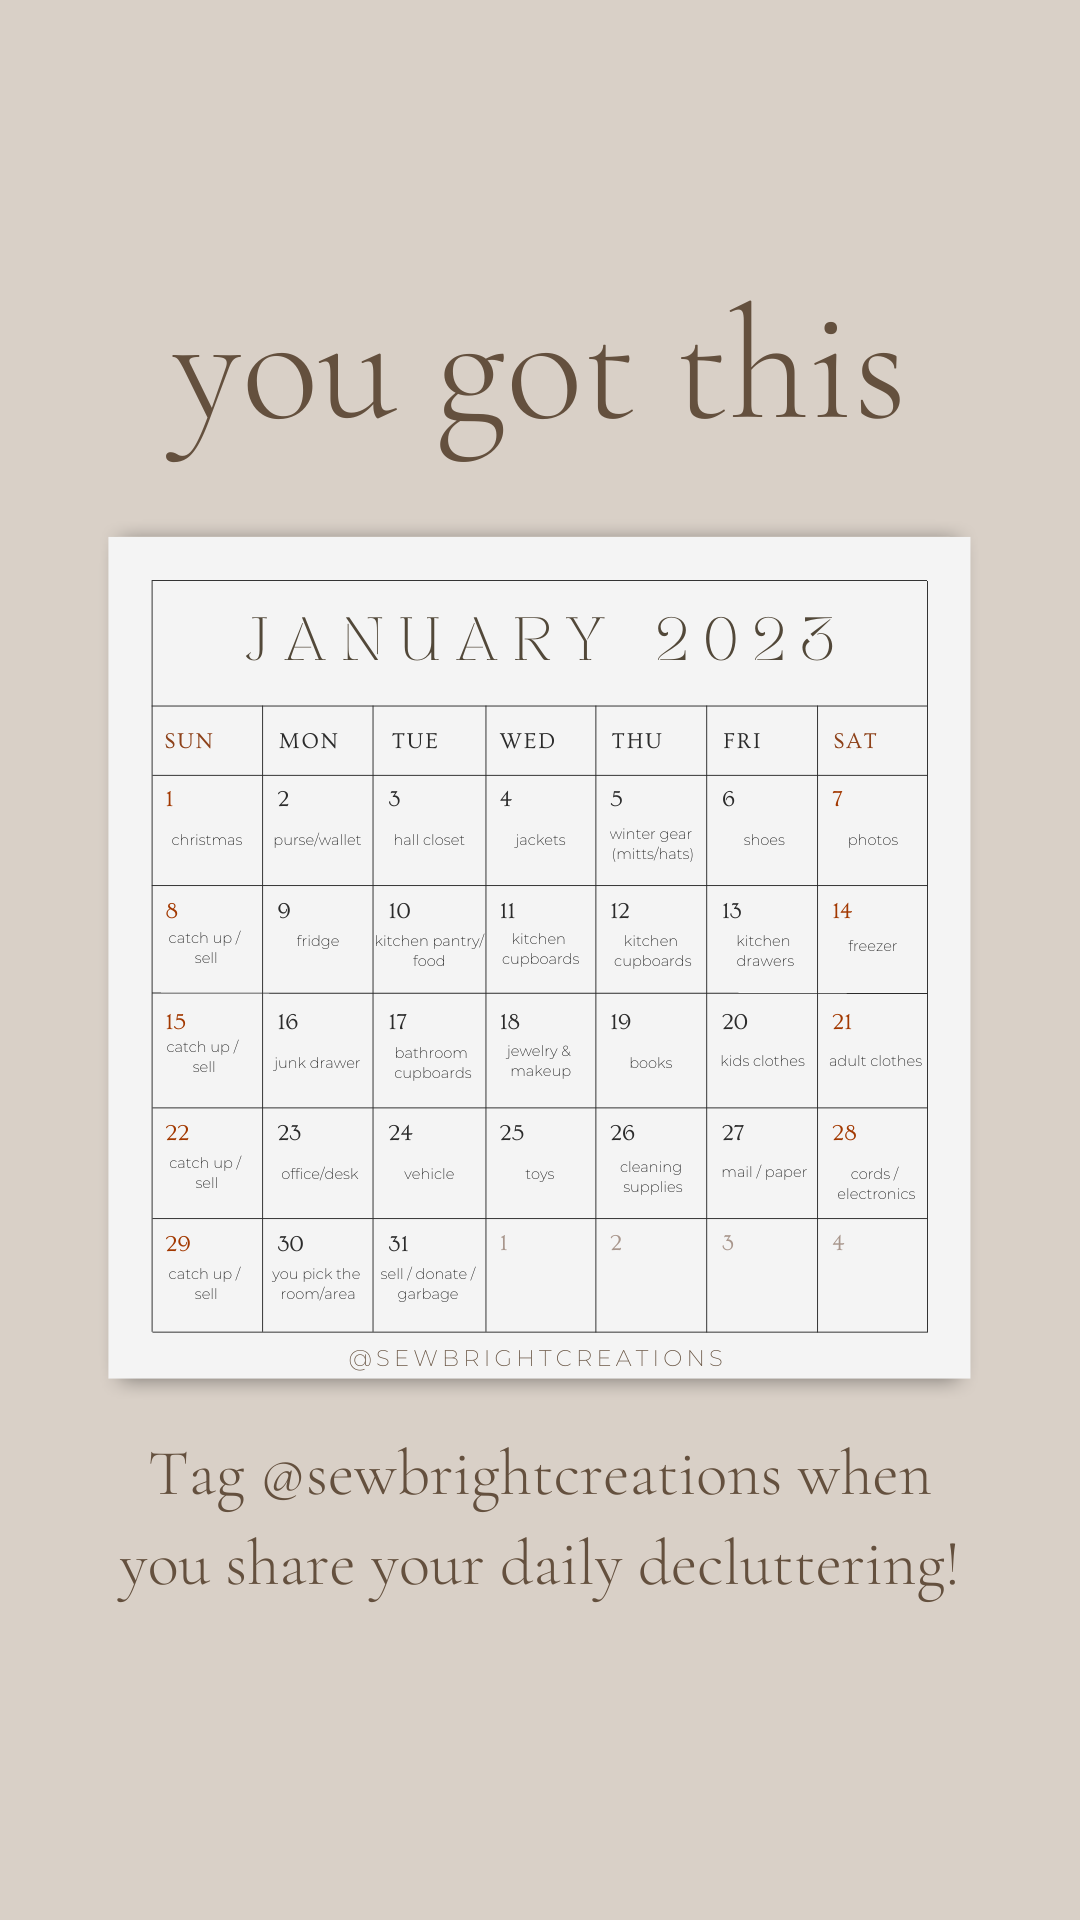 31 days of decluttering, sew bright creations, how to declutter